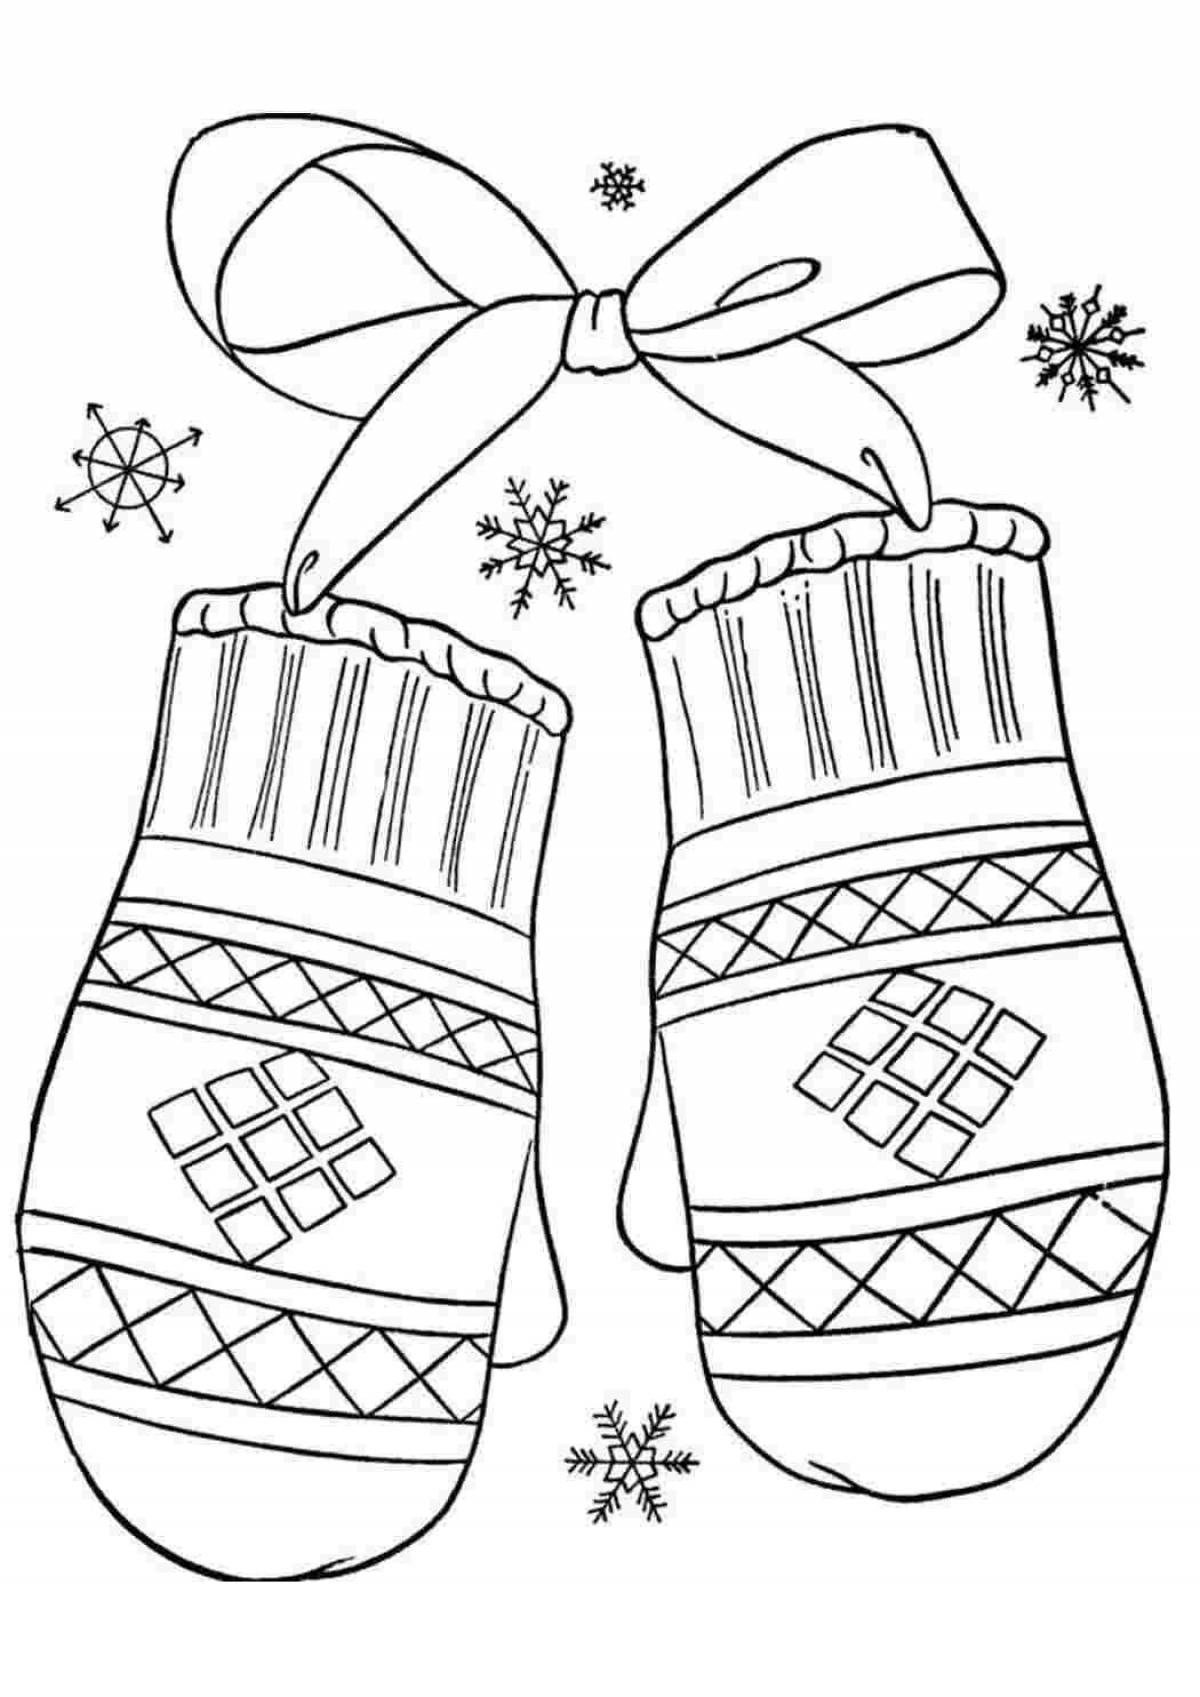 Patterned mittens for kids #4